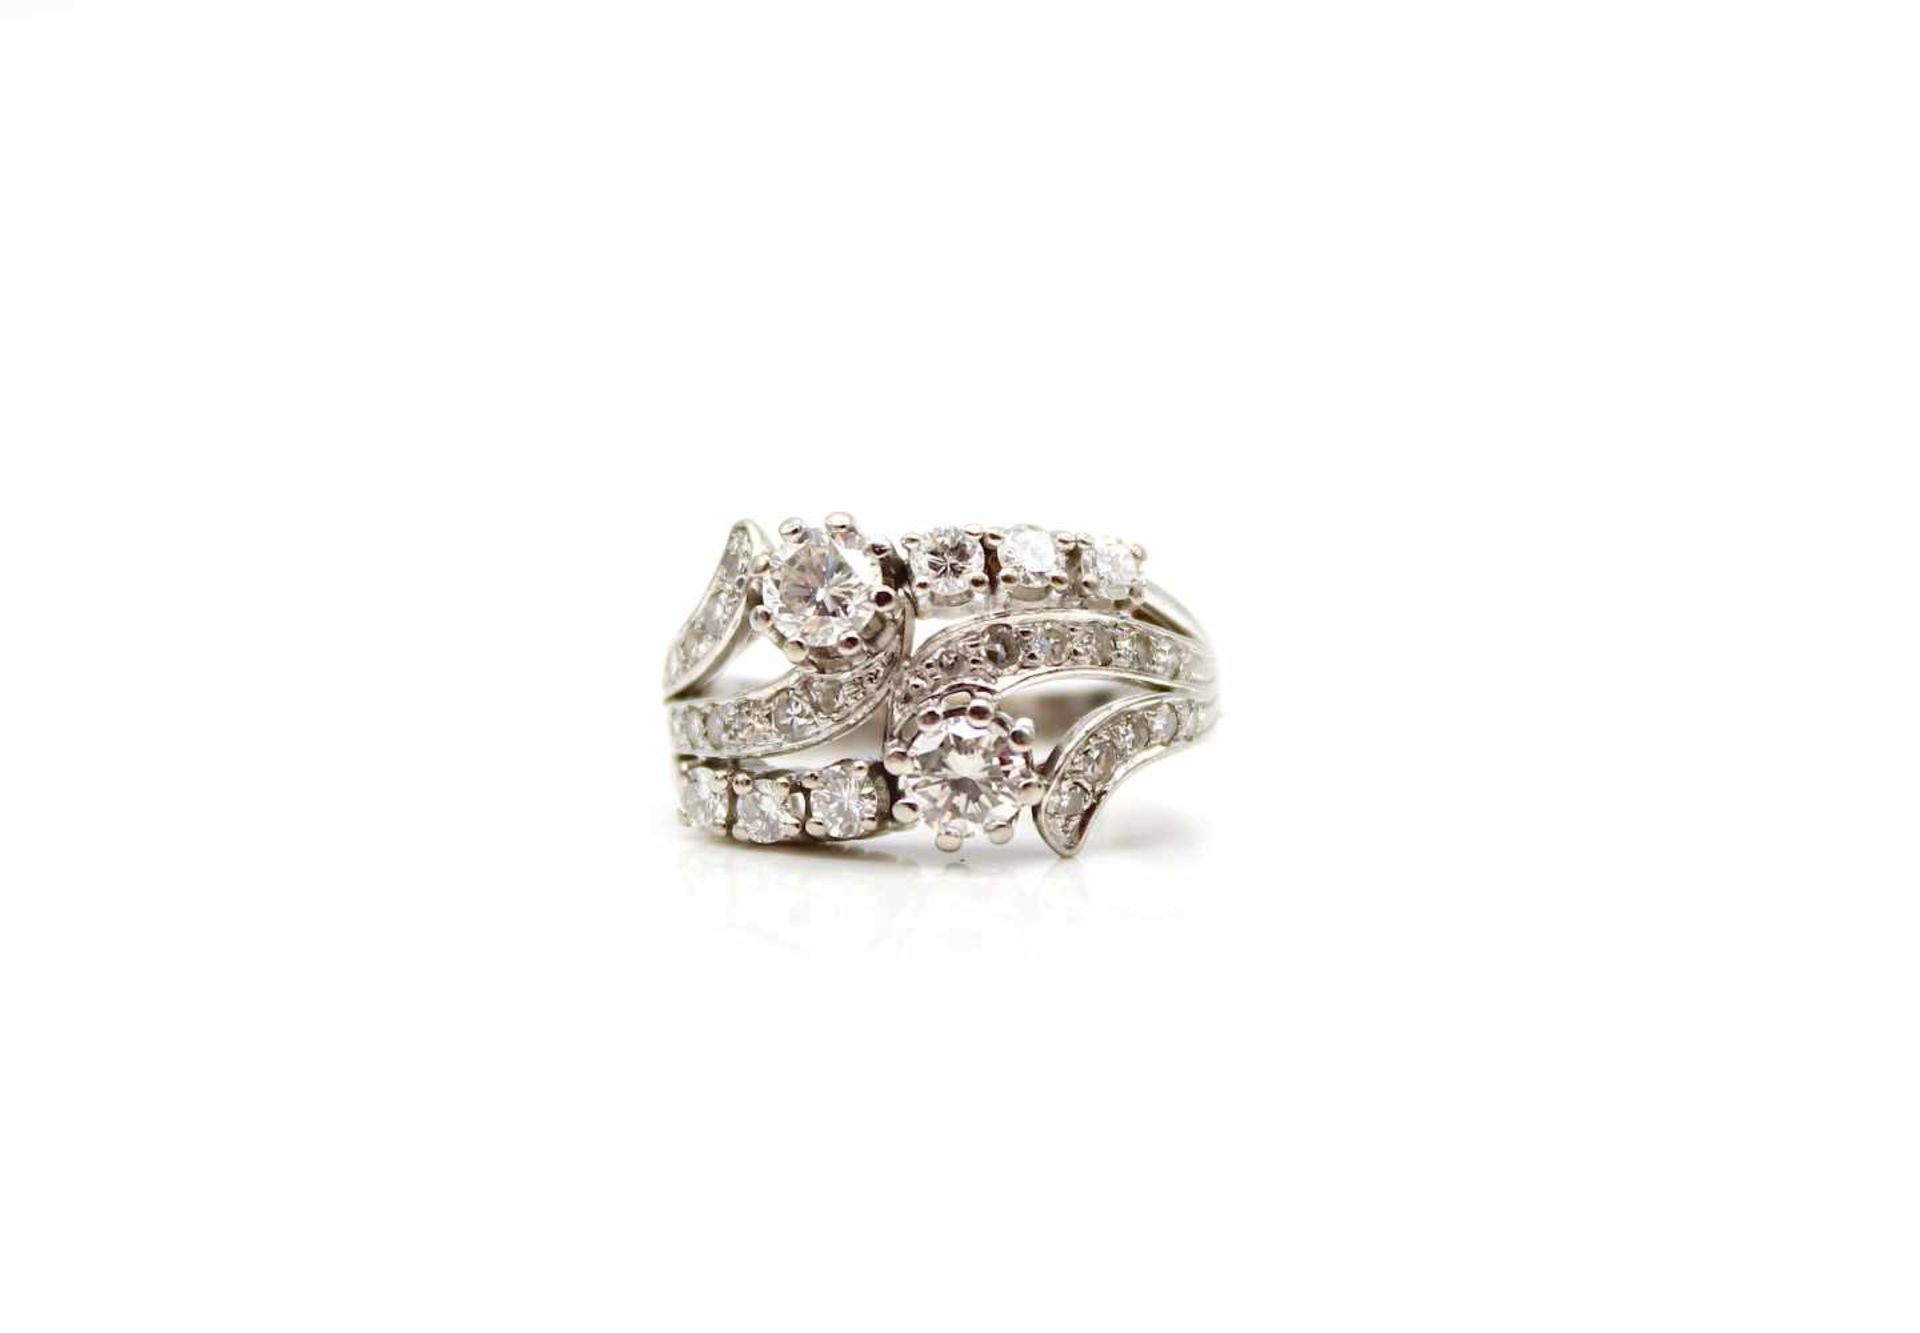 Ring made of 585 white gold with 30 diamonds ( brilliant and octagonal cut ), total ca. 1,45 ct (